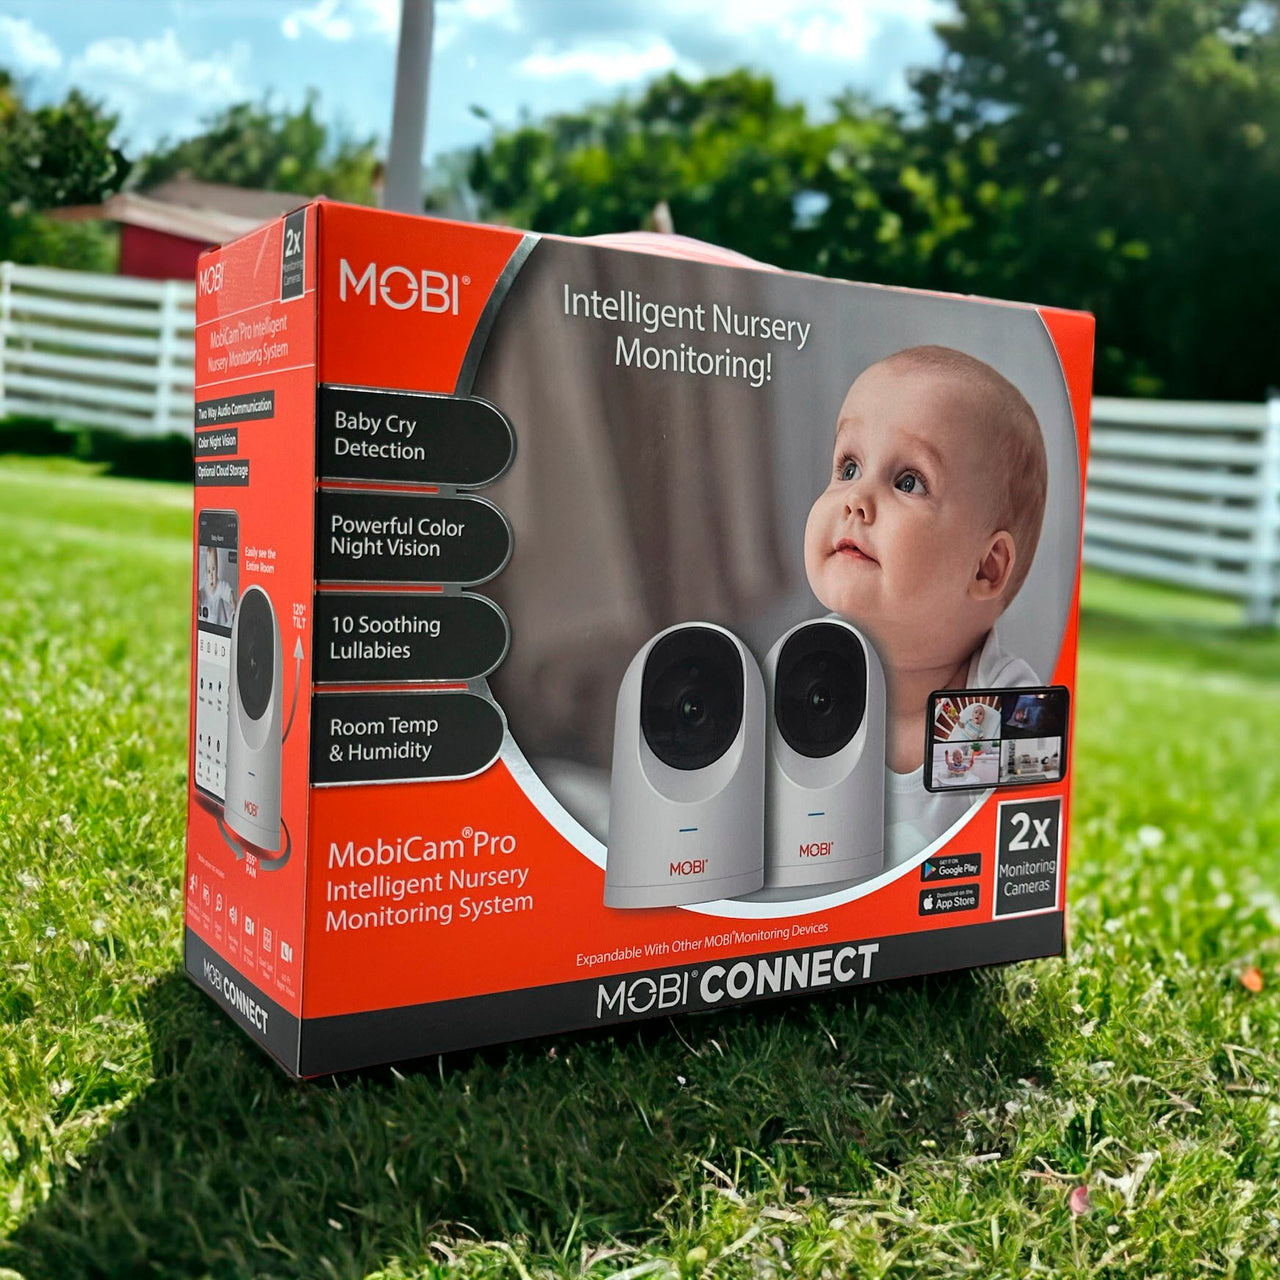 MOBI - Cam Pro HD 2 Pack Wi-Fi Pan & Tilt Video Baby Monitor with 2-way Audio, Powerful Color Night Vision, & Mounting Ability - White